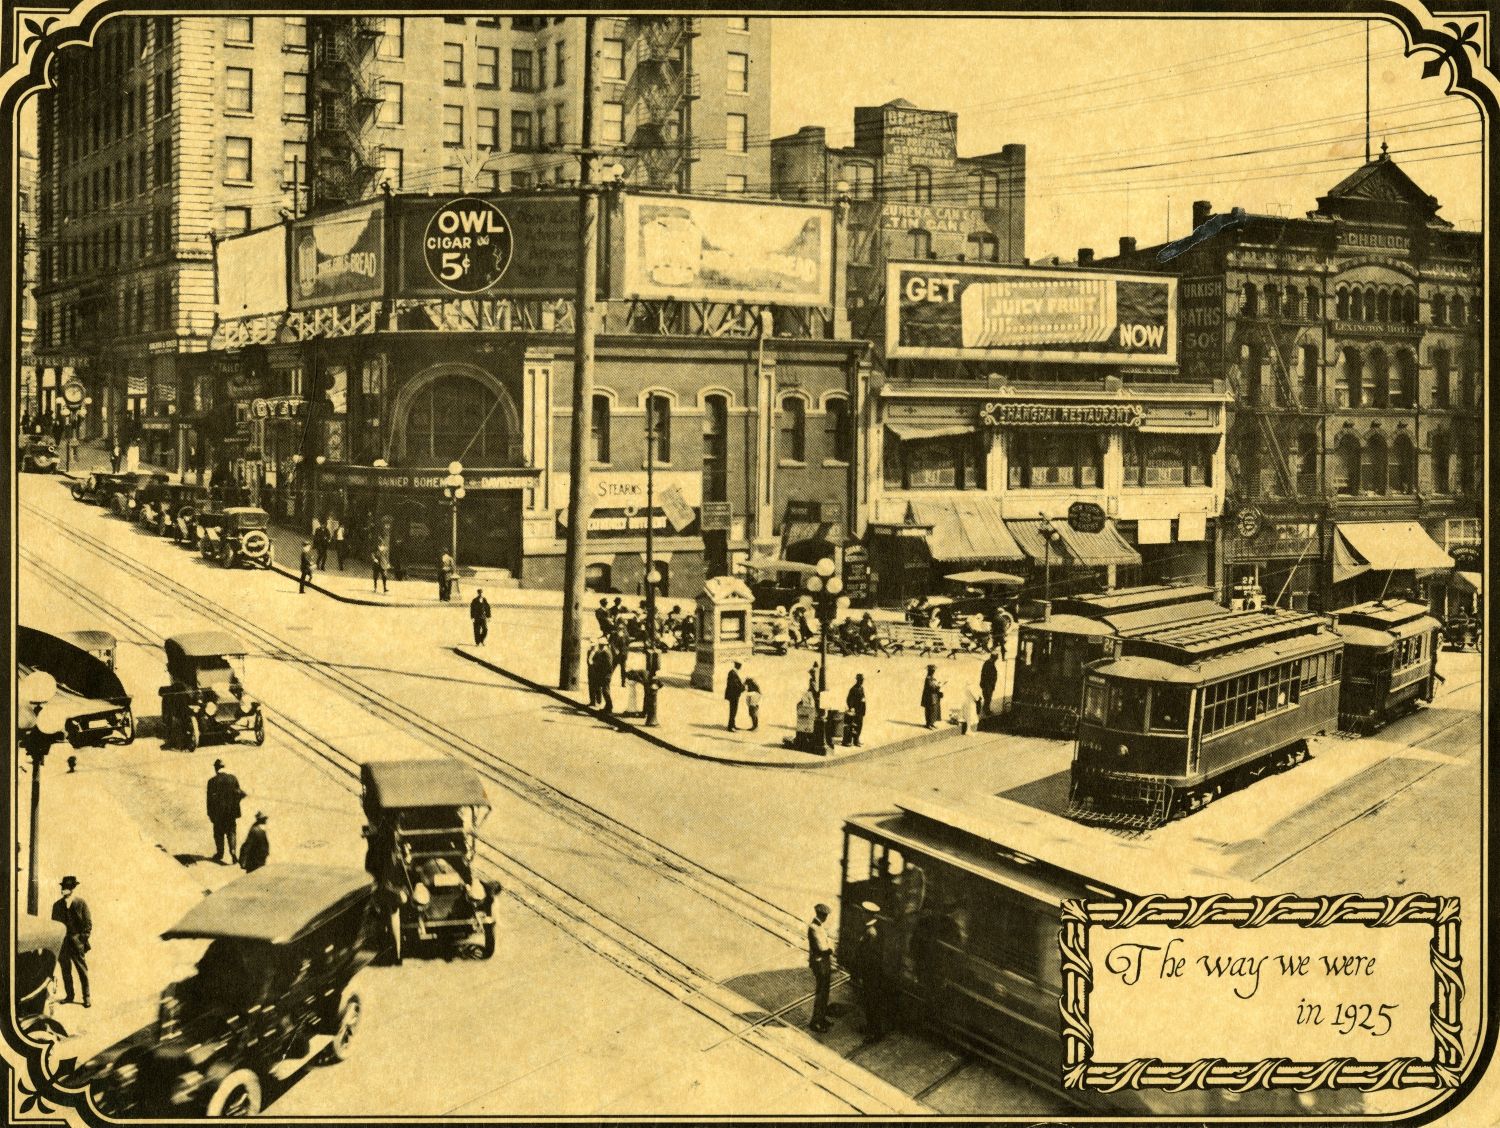 Pioneer Square in 1925